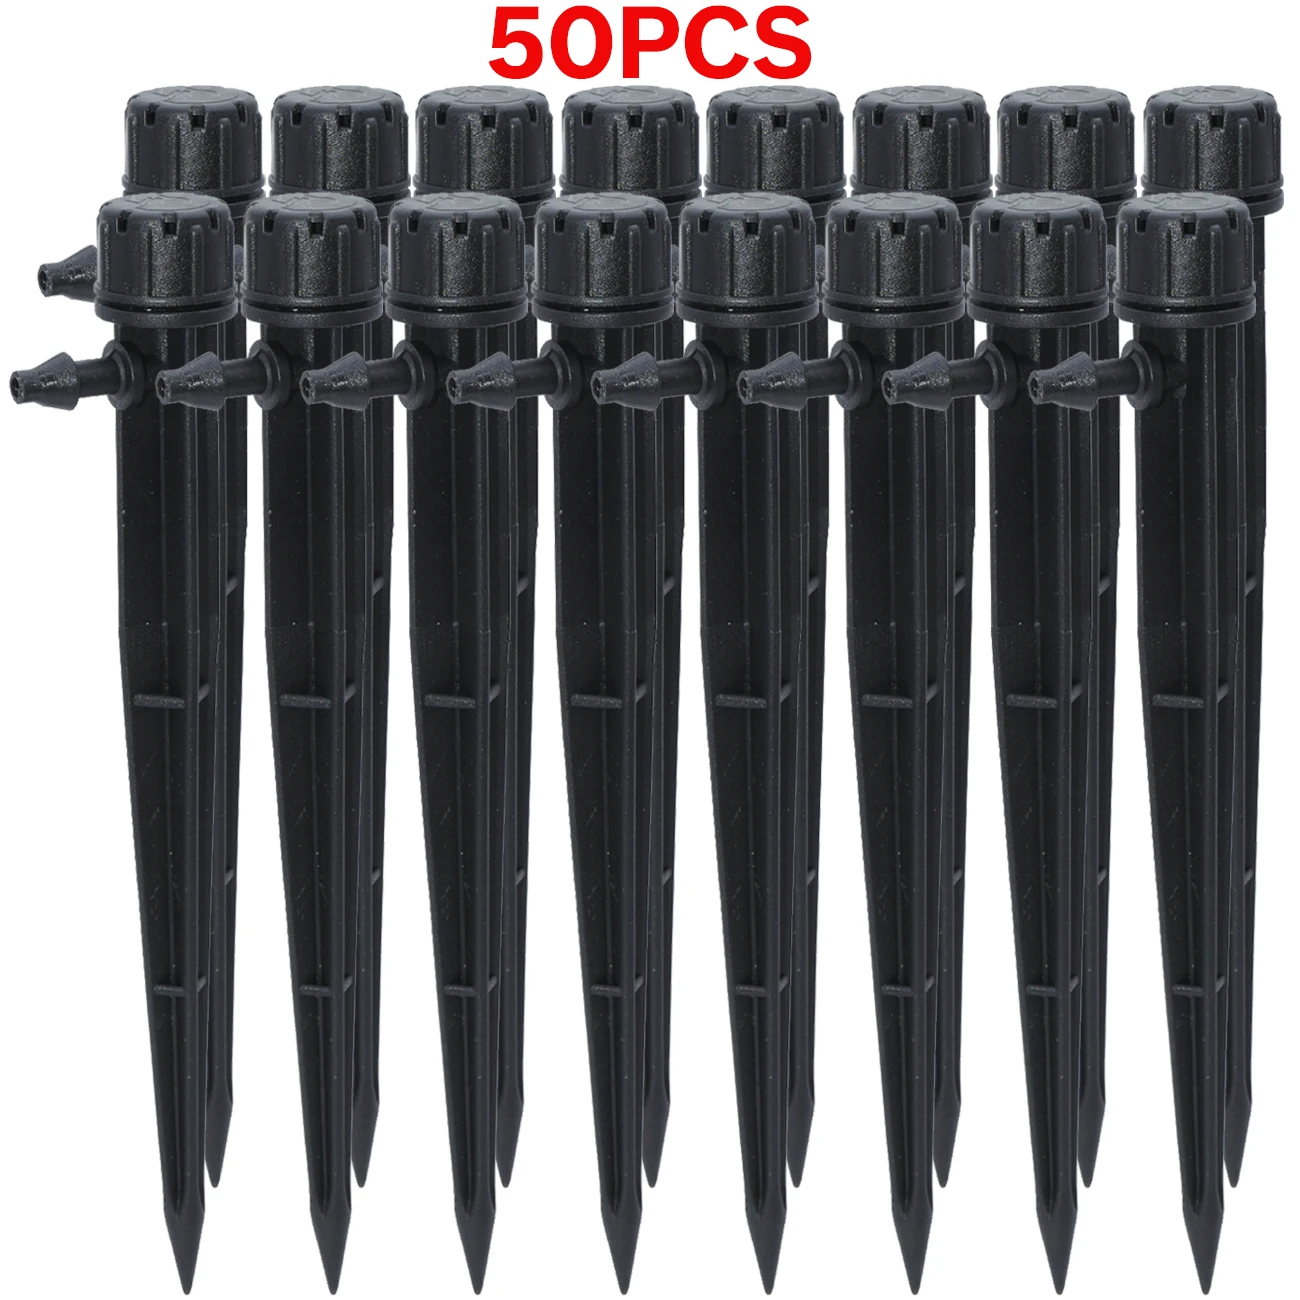 50PCS Irrigation Drippers for 4mm/7mm Tube 360 Degree 8 Holes Adjustable Dripper